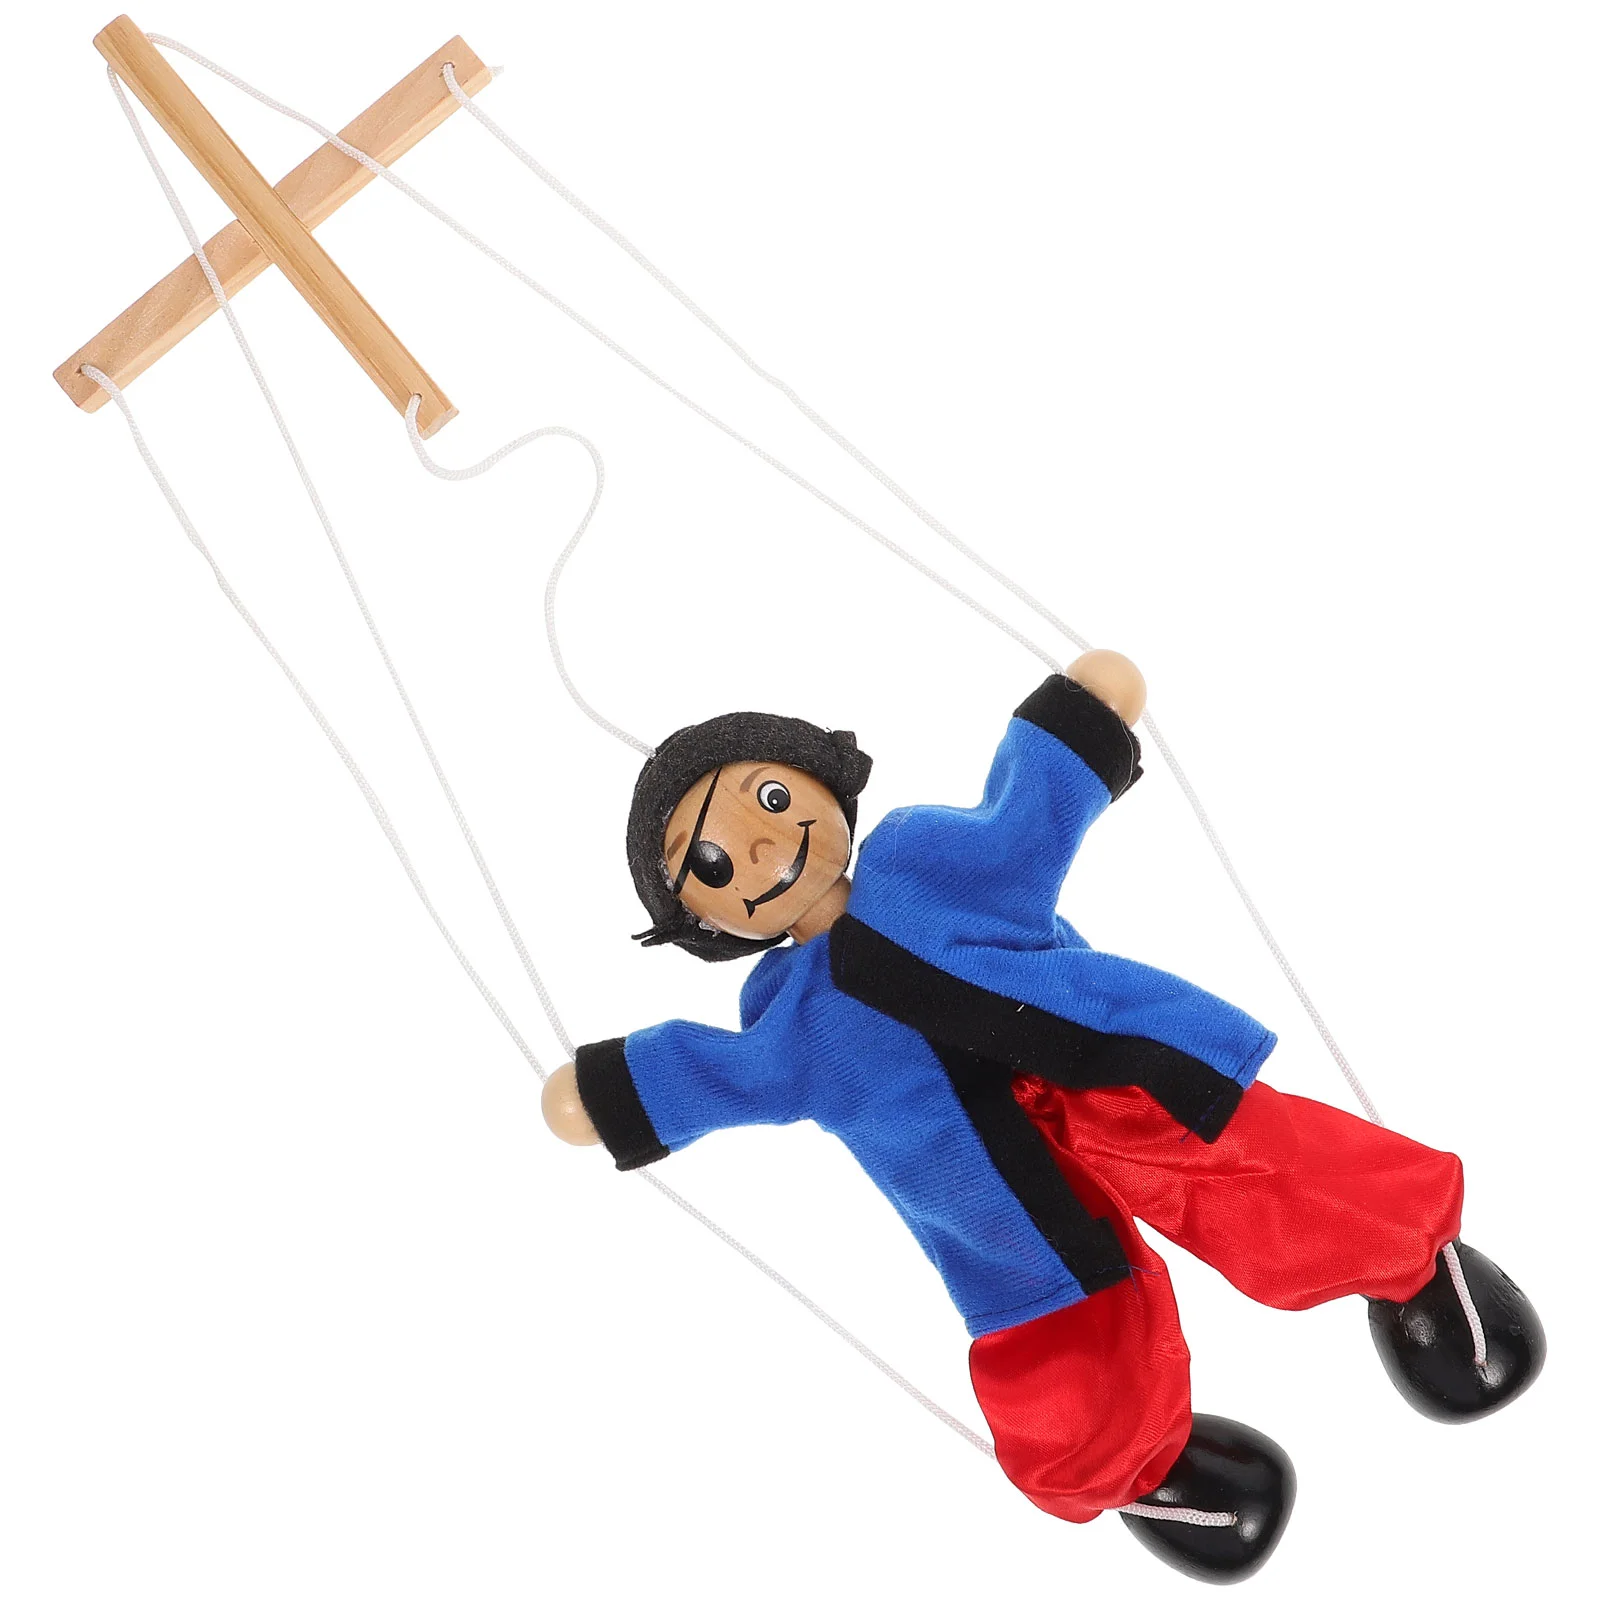 

Safigle Puppet Wooden Pirate Marionette String Puppet Creative Marionettes Sting Puppets Kids Silly String Puppets String Toy